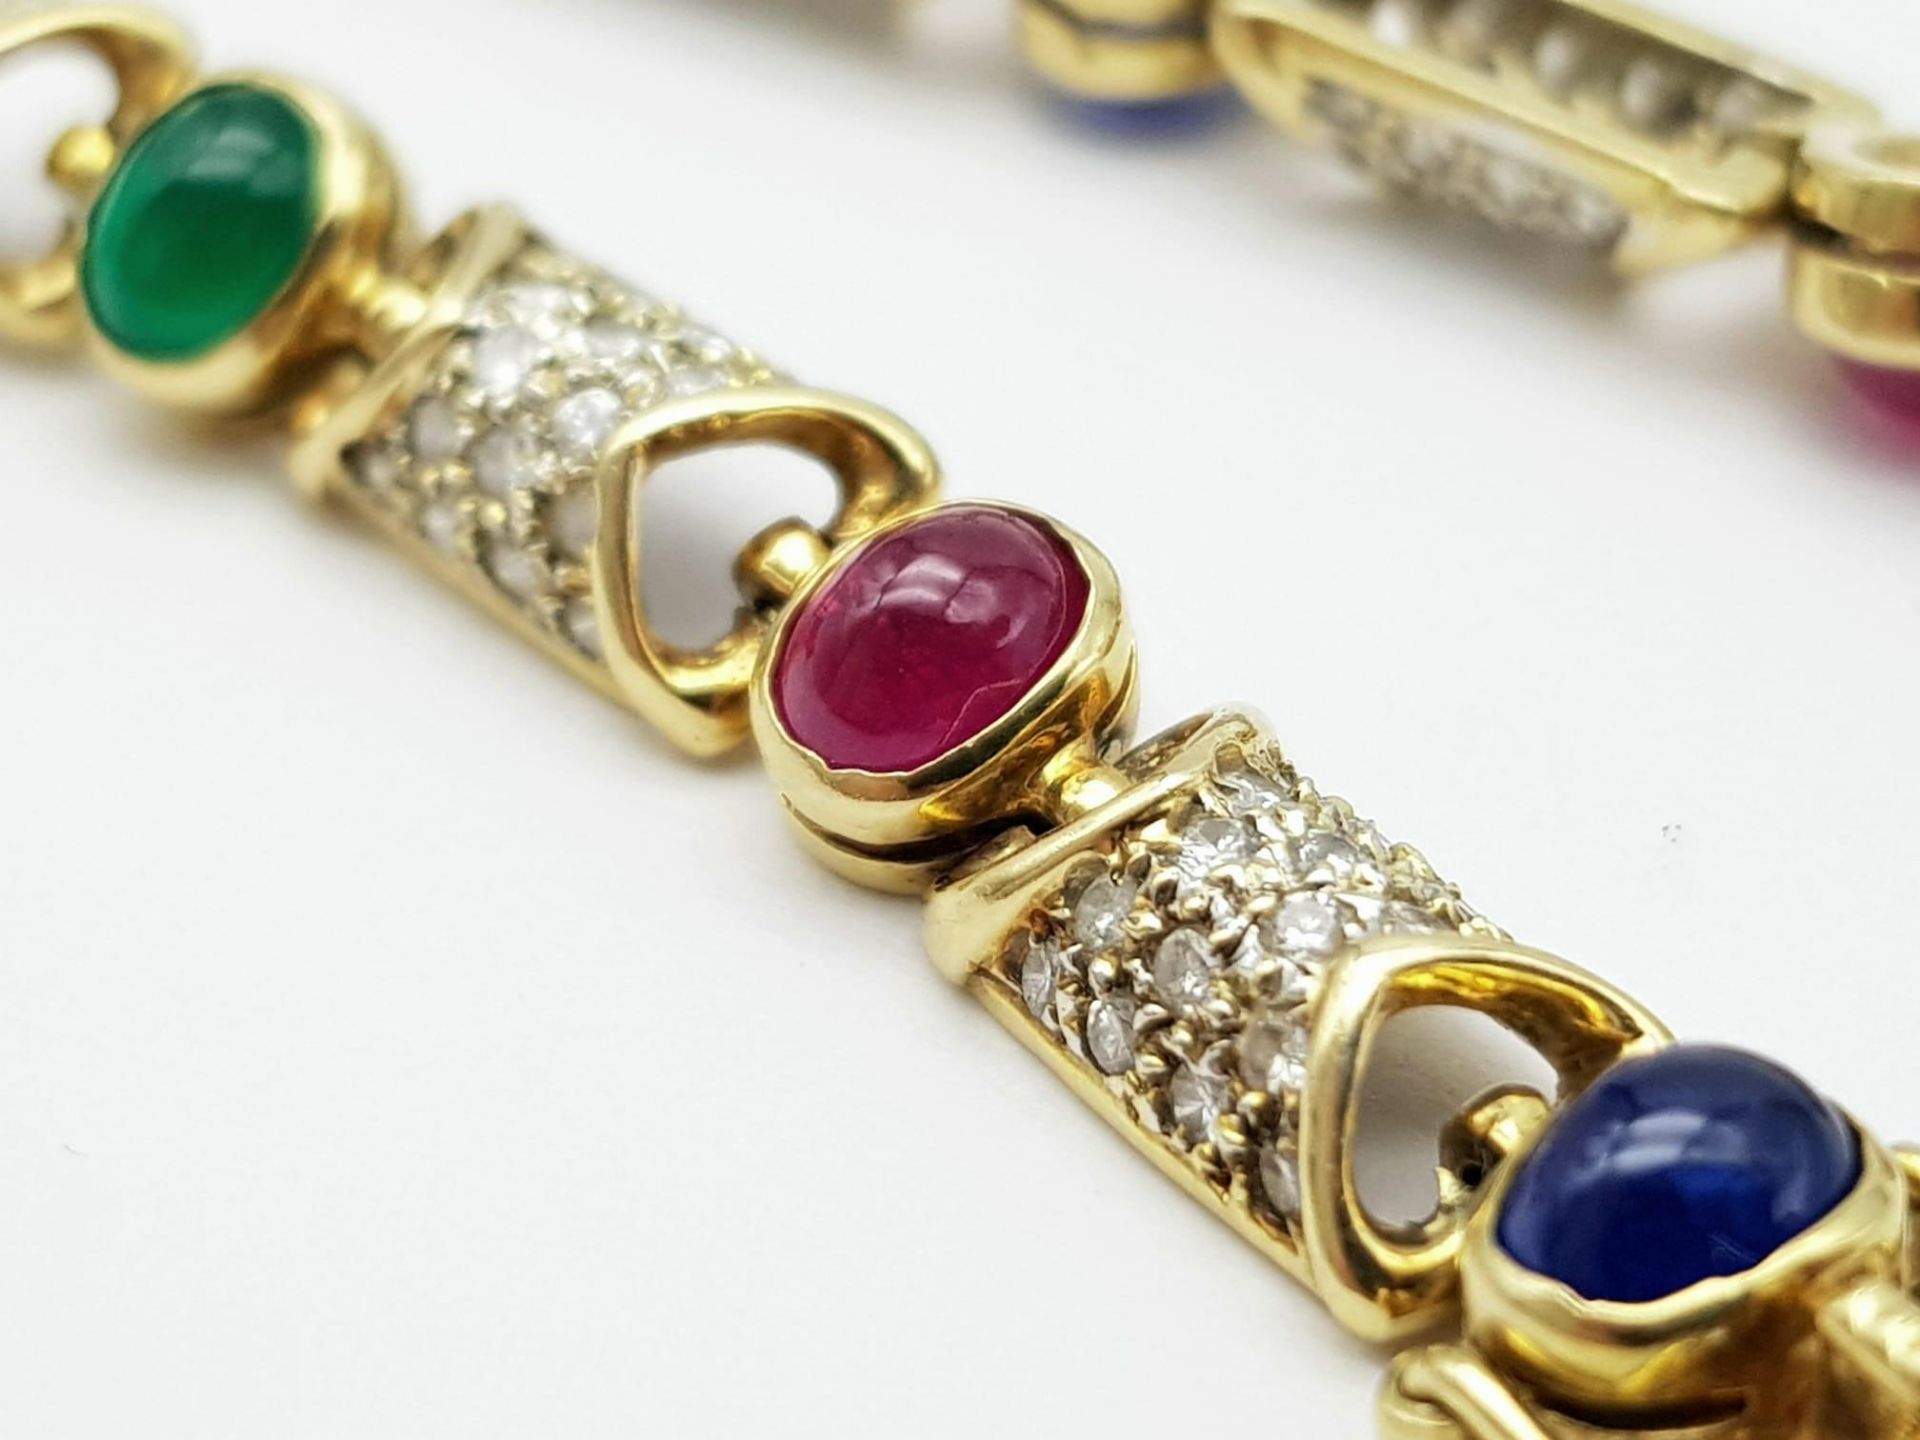 A GORGEOUS 18K YELLOW GOLD DIAMOND, SAPPHIRE, RUBY & EMERALD SET BRACELET. 1.50CTW OF ENCRUSTED - Image 5 of 6